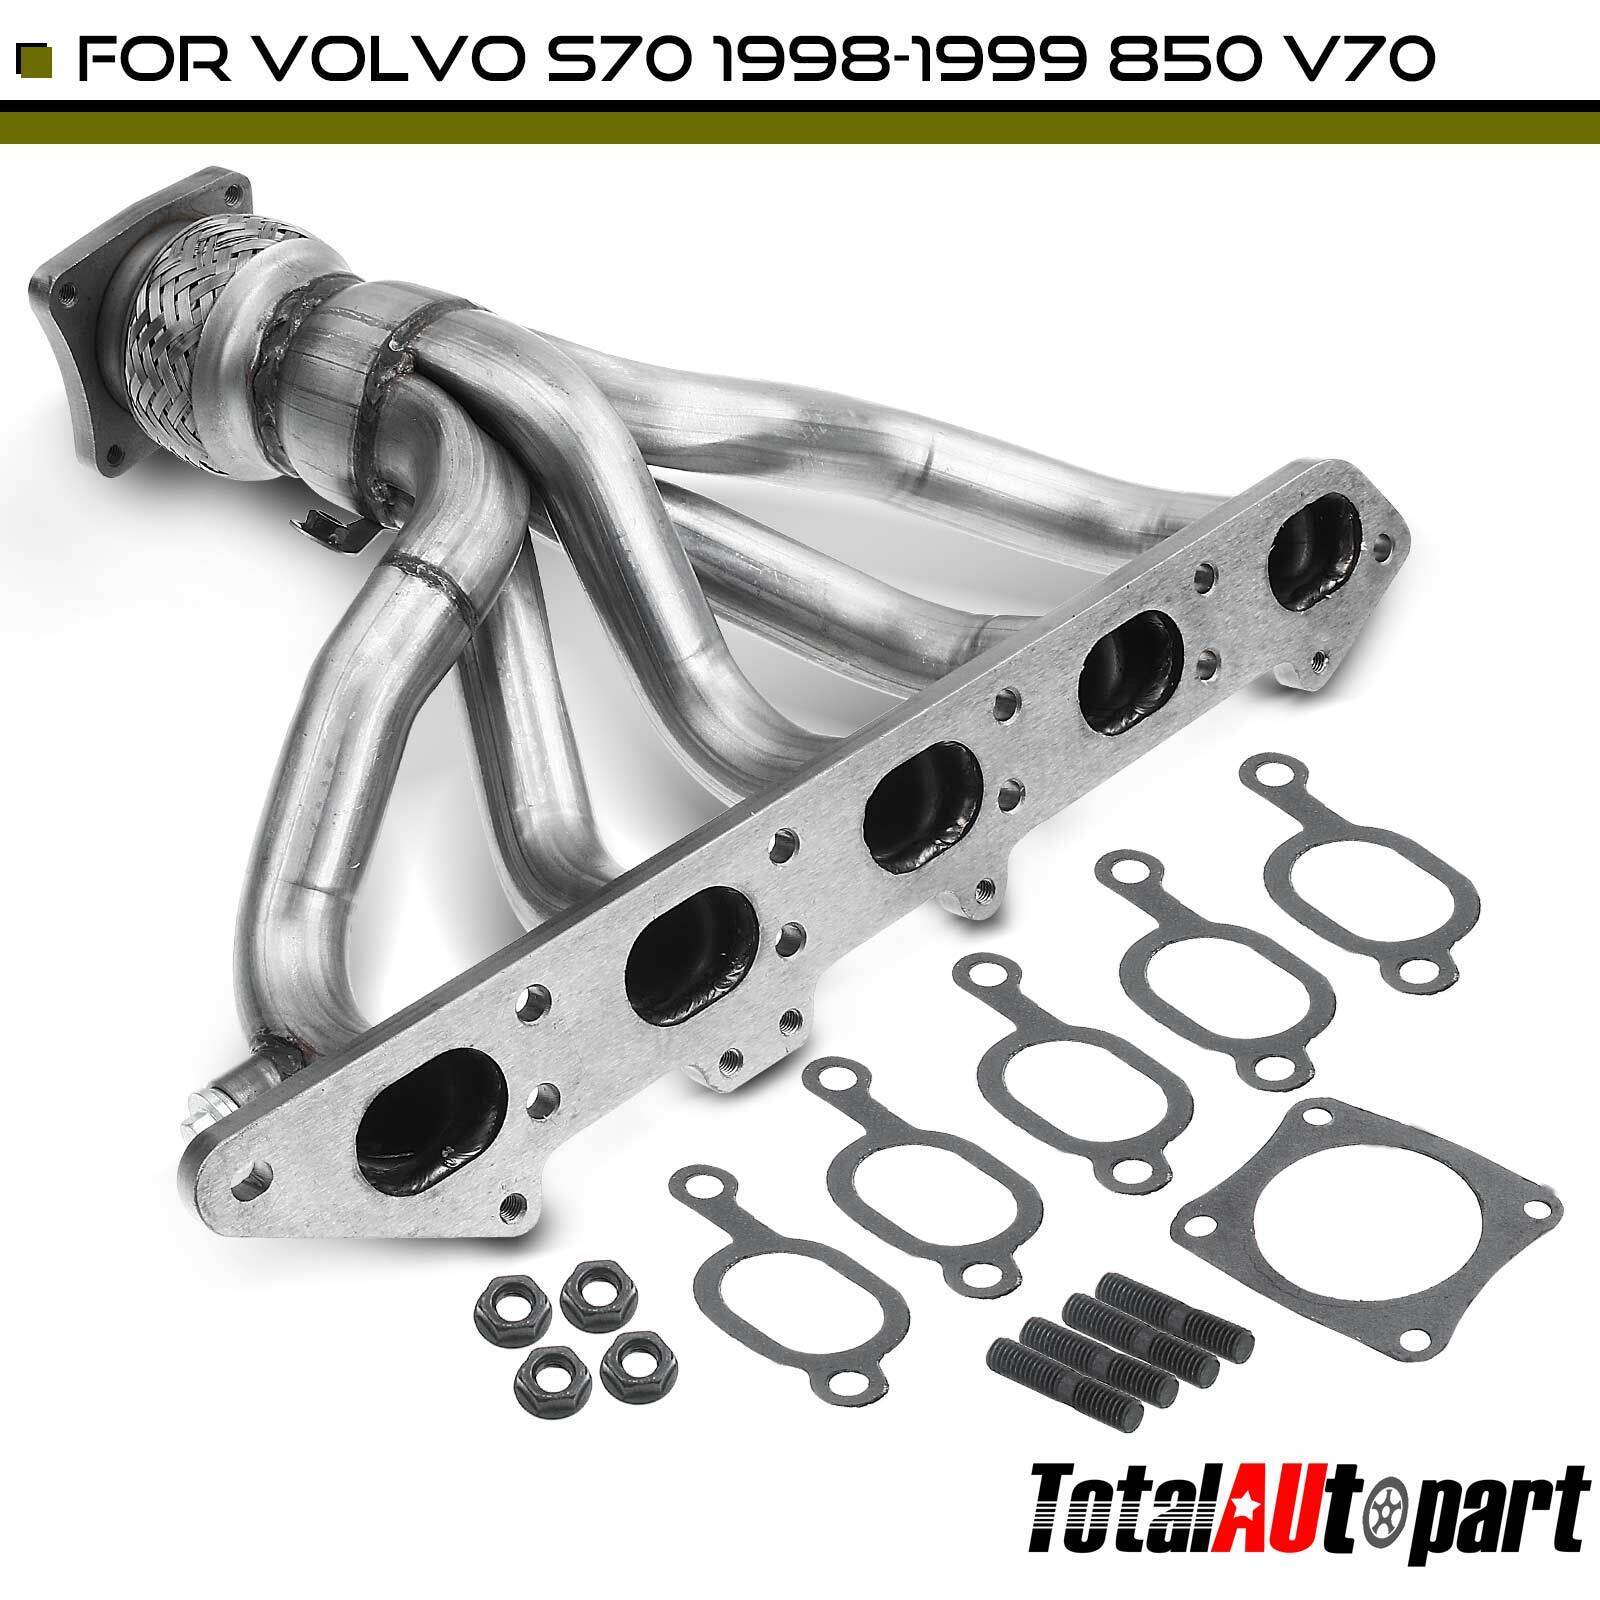 Exhaust Manifold w/ Gasket Kit for Volvo 850 S70 V70 L5 2.4L Naturally Aspirated